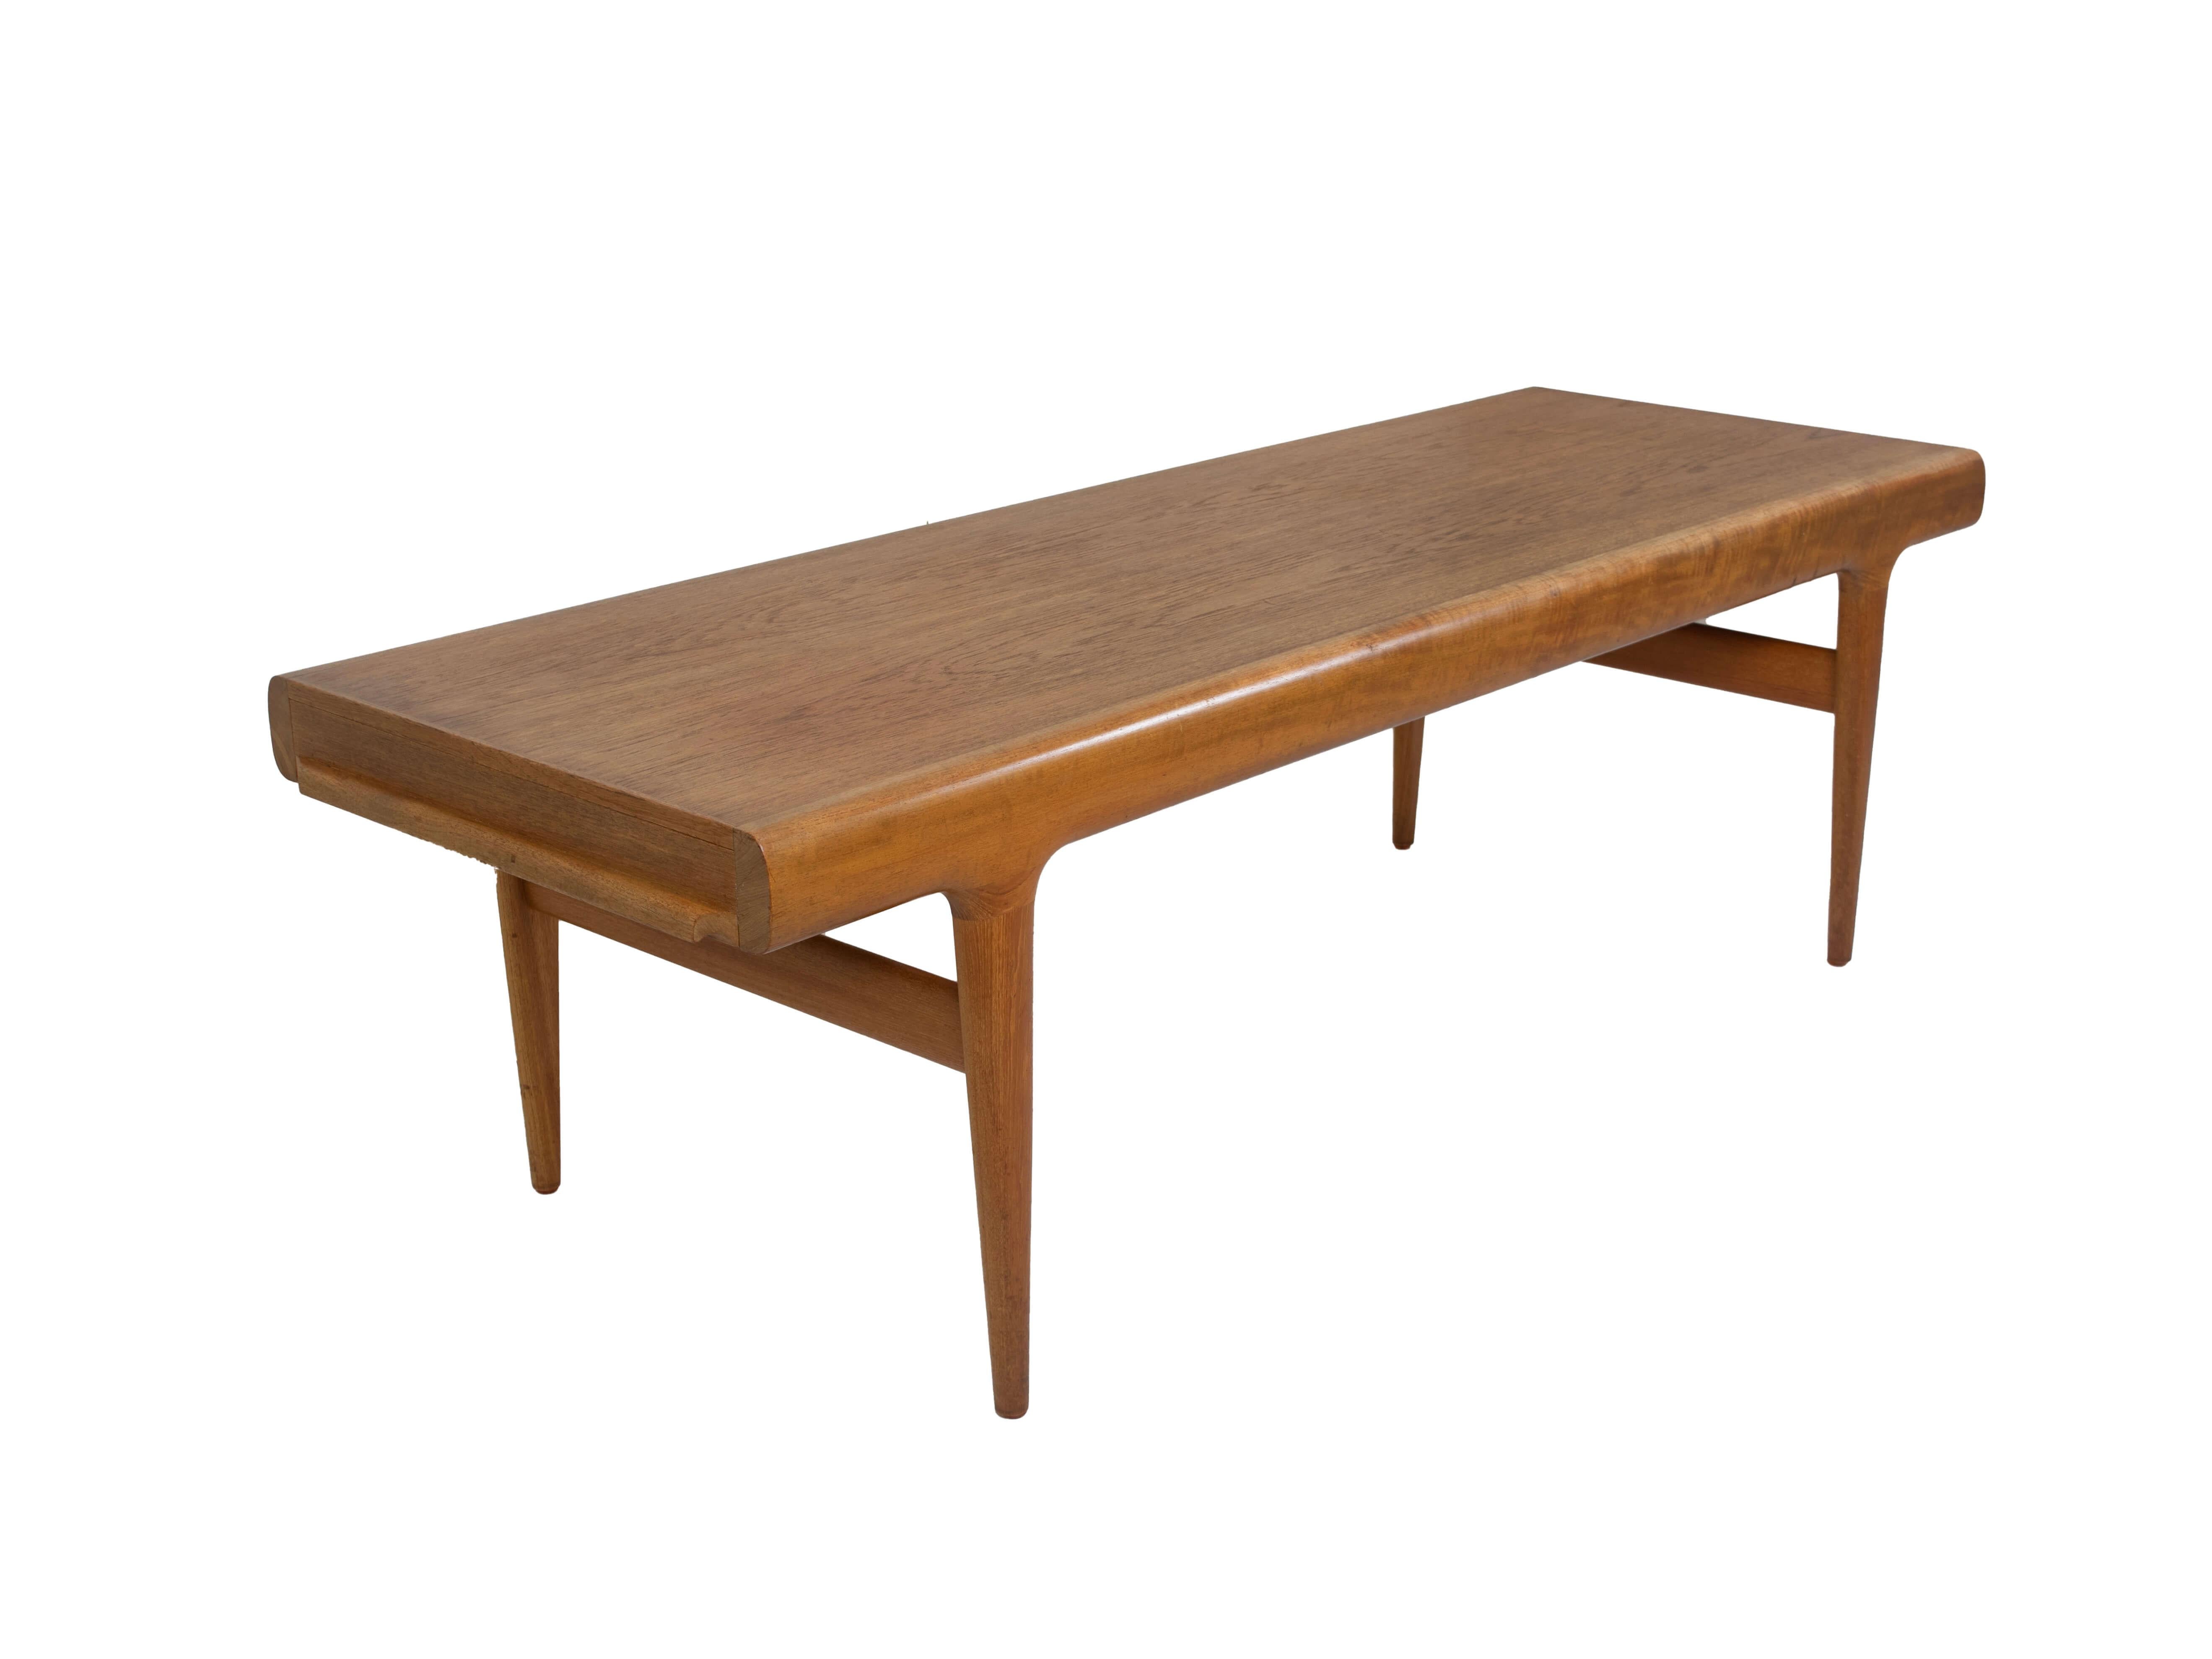 Danish vintage Design Johannes Andersen extendable teak coffee table for Uldum Møbelfabrik, Denmark 1960s. This vintage coffee table has some unique features. It has a pull-out top with blue/greyish formic and a pull-out shelve on the other side.